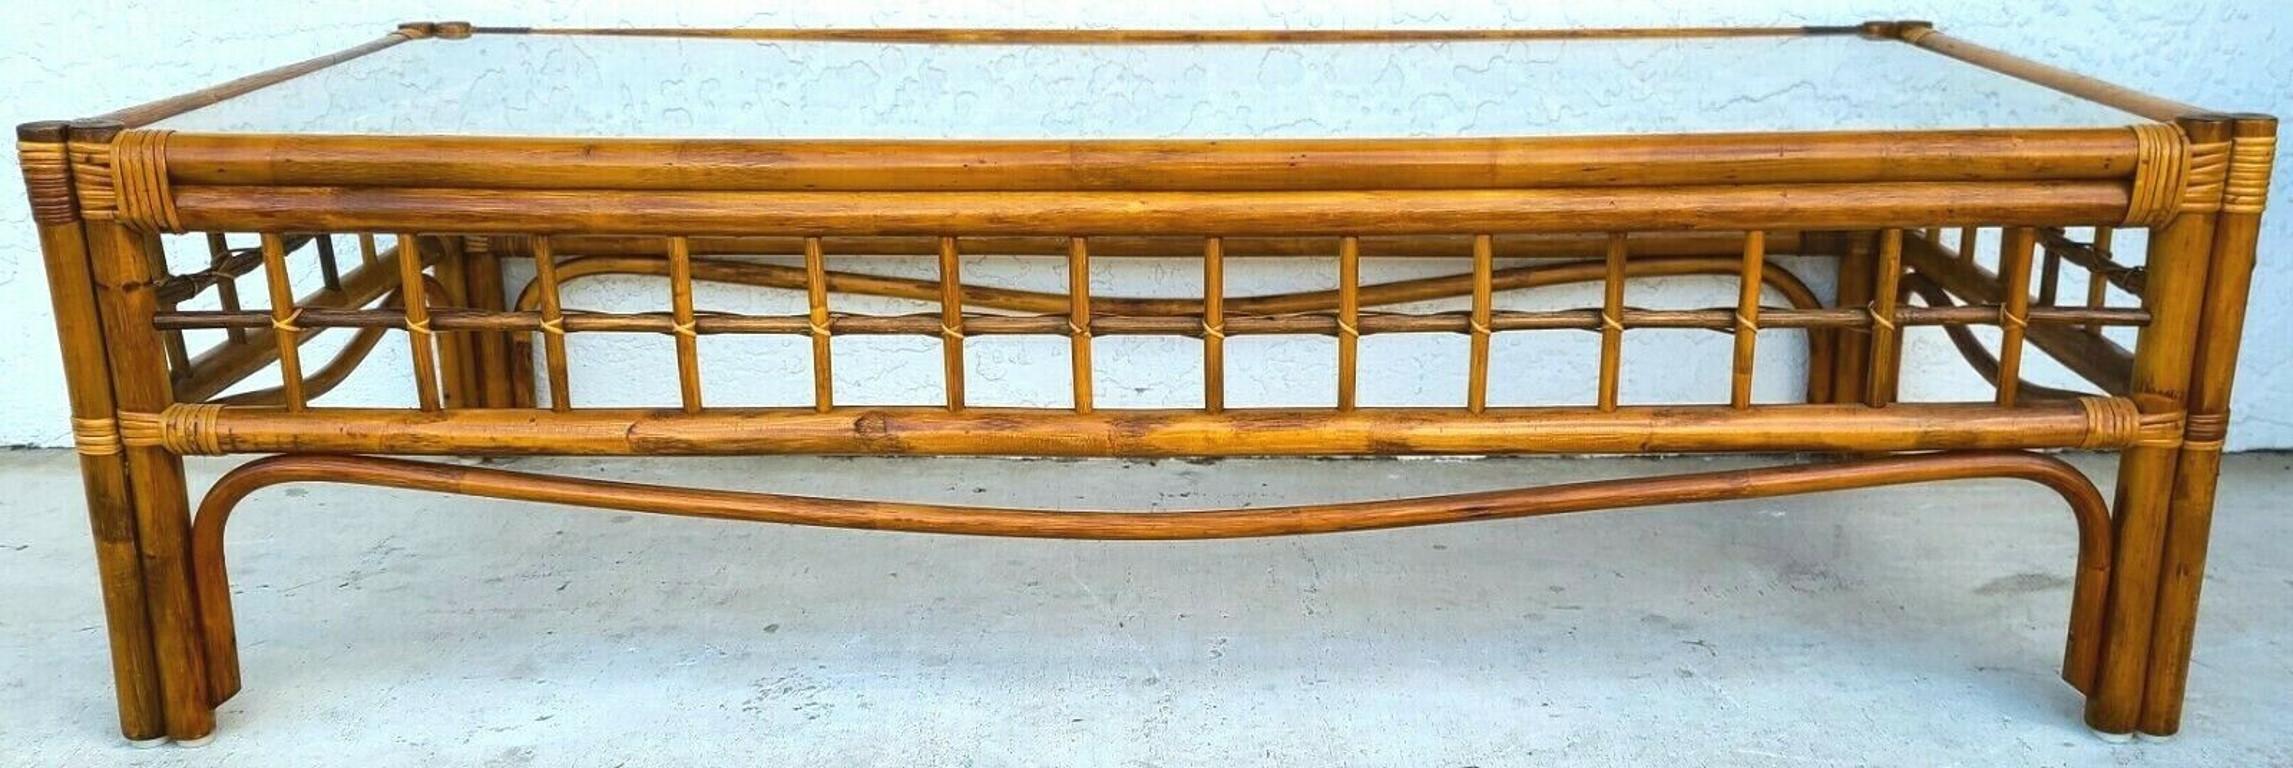 For FULL item description be sure to click on CONTINUE READING at the bottom of this listing.

Offering One Of Our Recent Palm Beach Estate Fine Furniture Acquisitions Of A
FRANCO ALBINI Style Bamboo Rattan Coffee Table by WILSHIRE

This